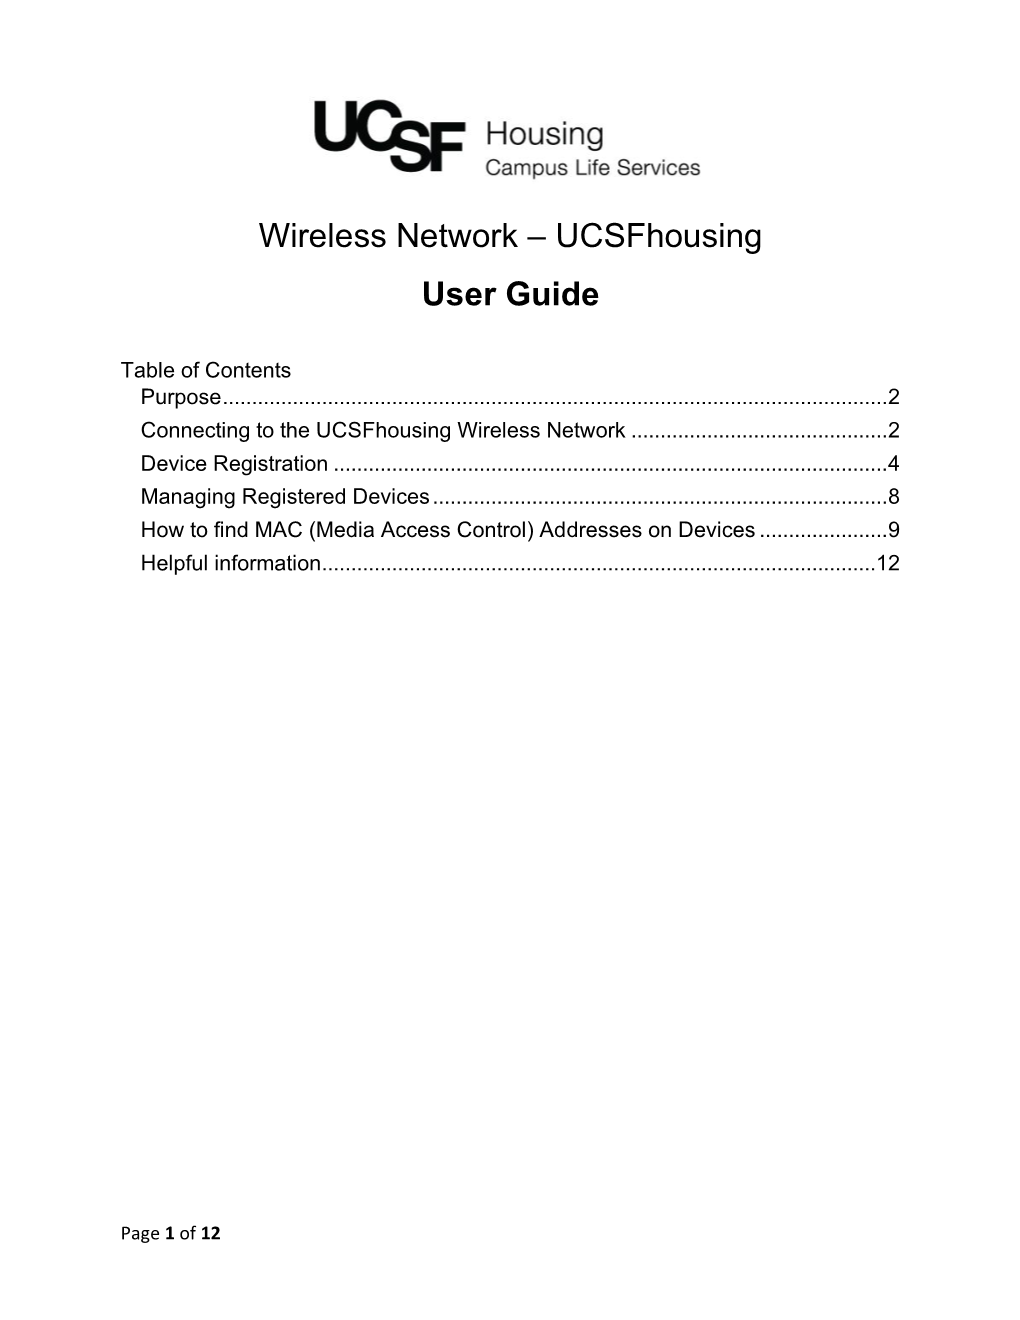 Wireless Network – Ucsfhousing User Guide